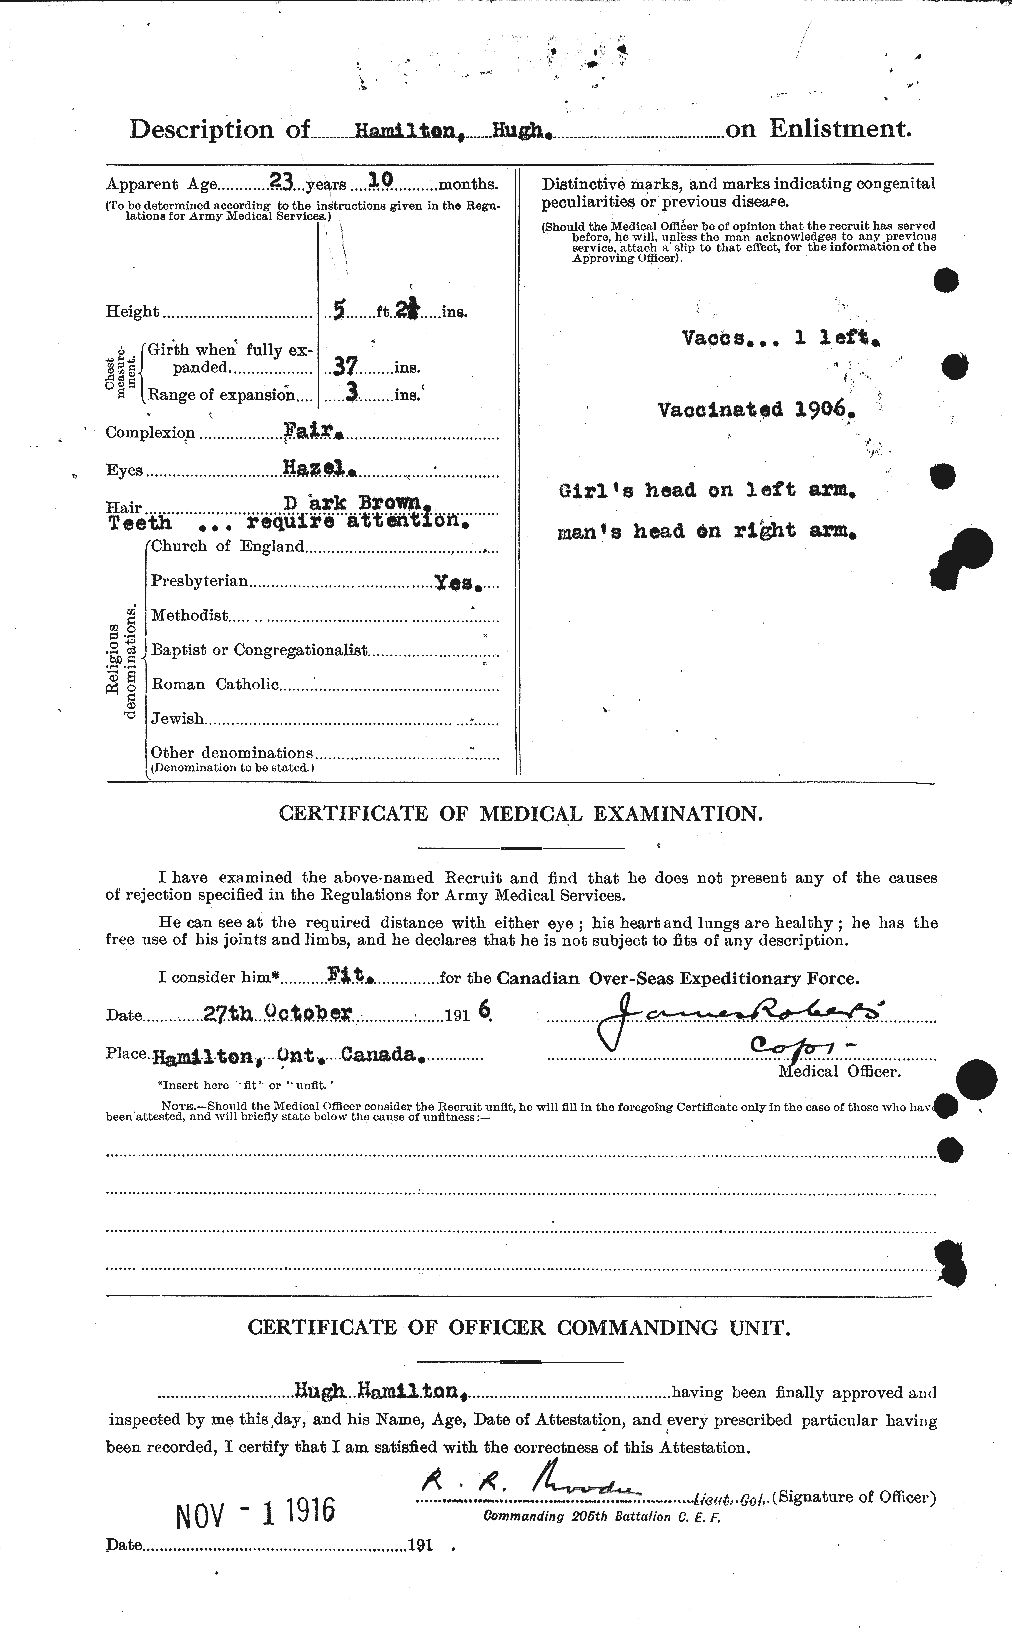 Personnel Records of the First World War - CEF 372911b